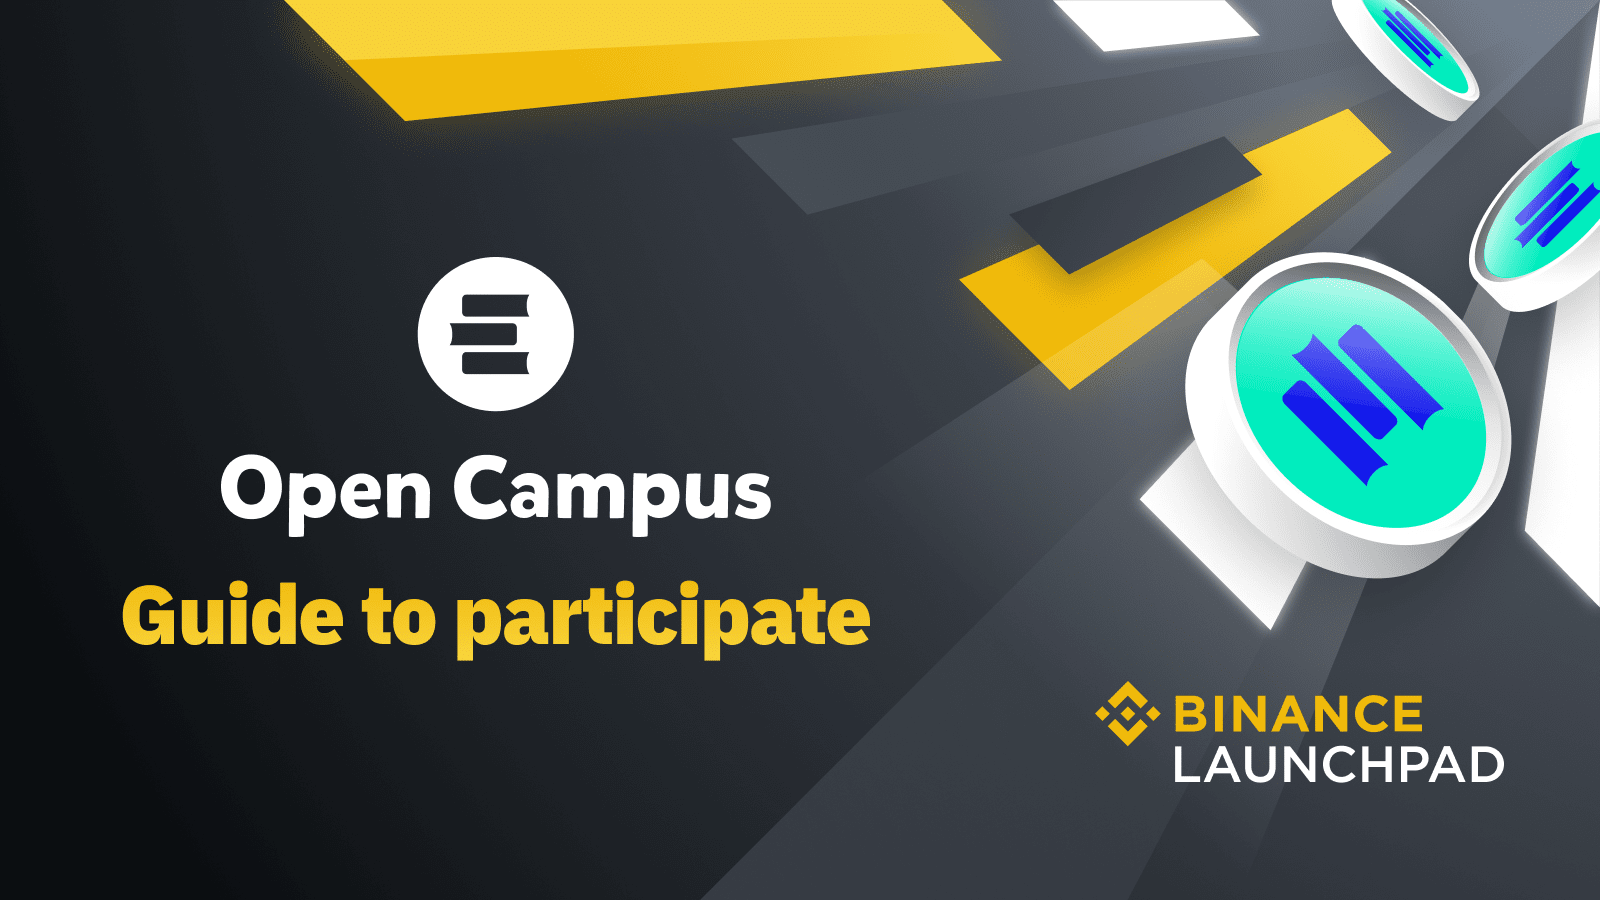 NEW LAUNCHPAD: A walkthrough of Open Campus in just a few minutes